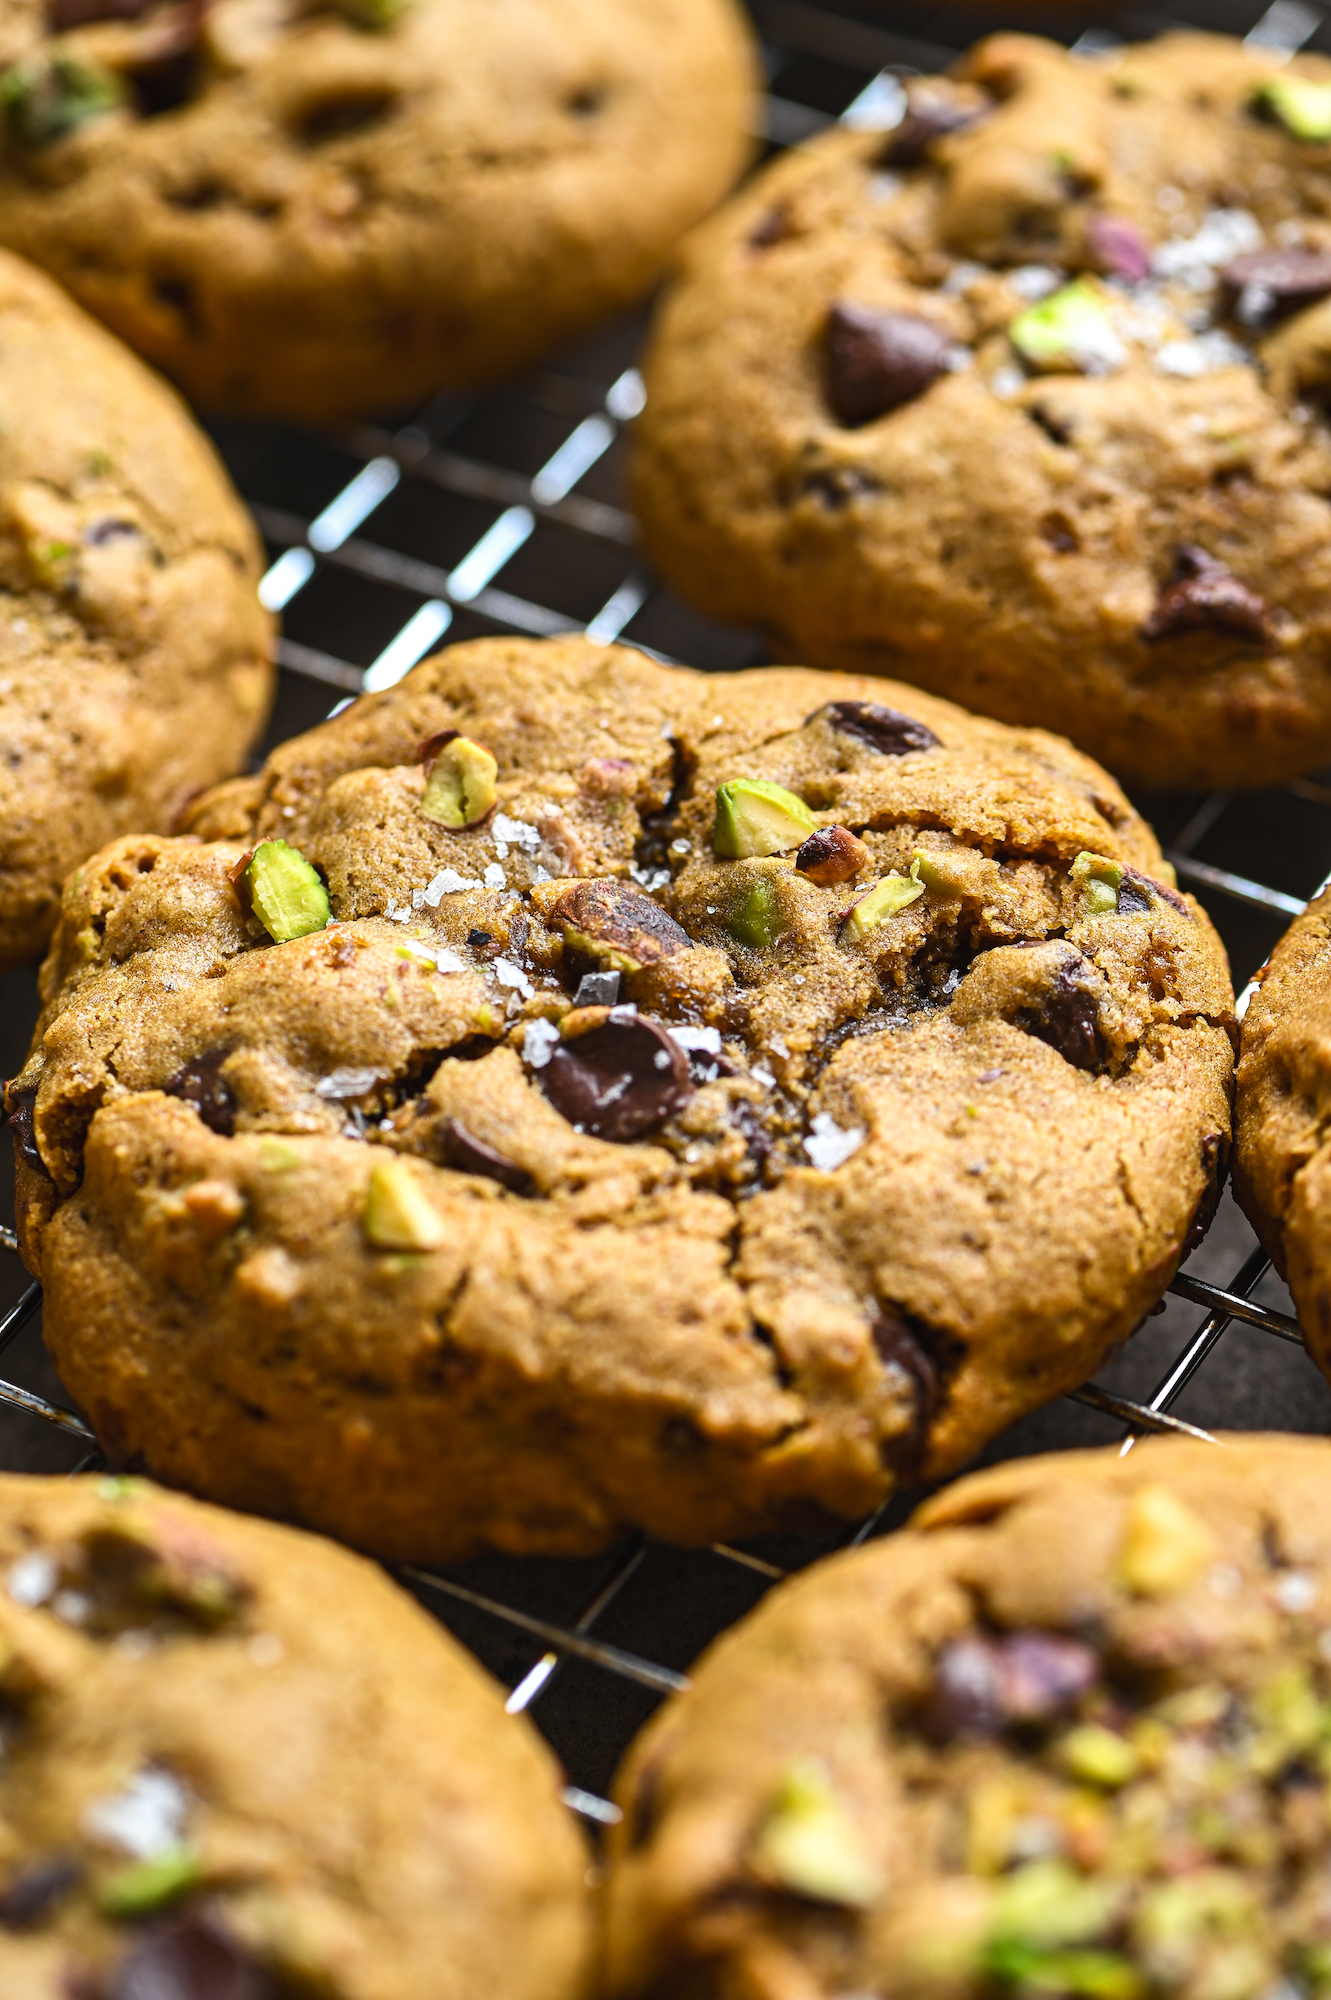 Close up of freshly baked chocolate chip and pistachio gluten free cookies with sea salt flakes by teri-ann carty